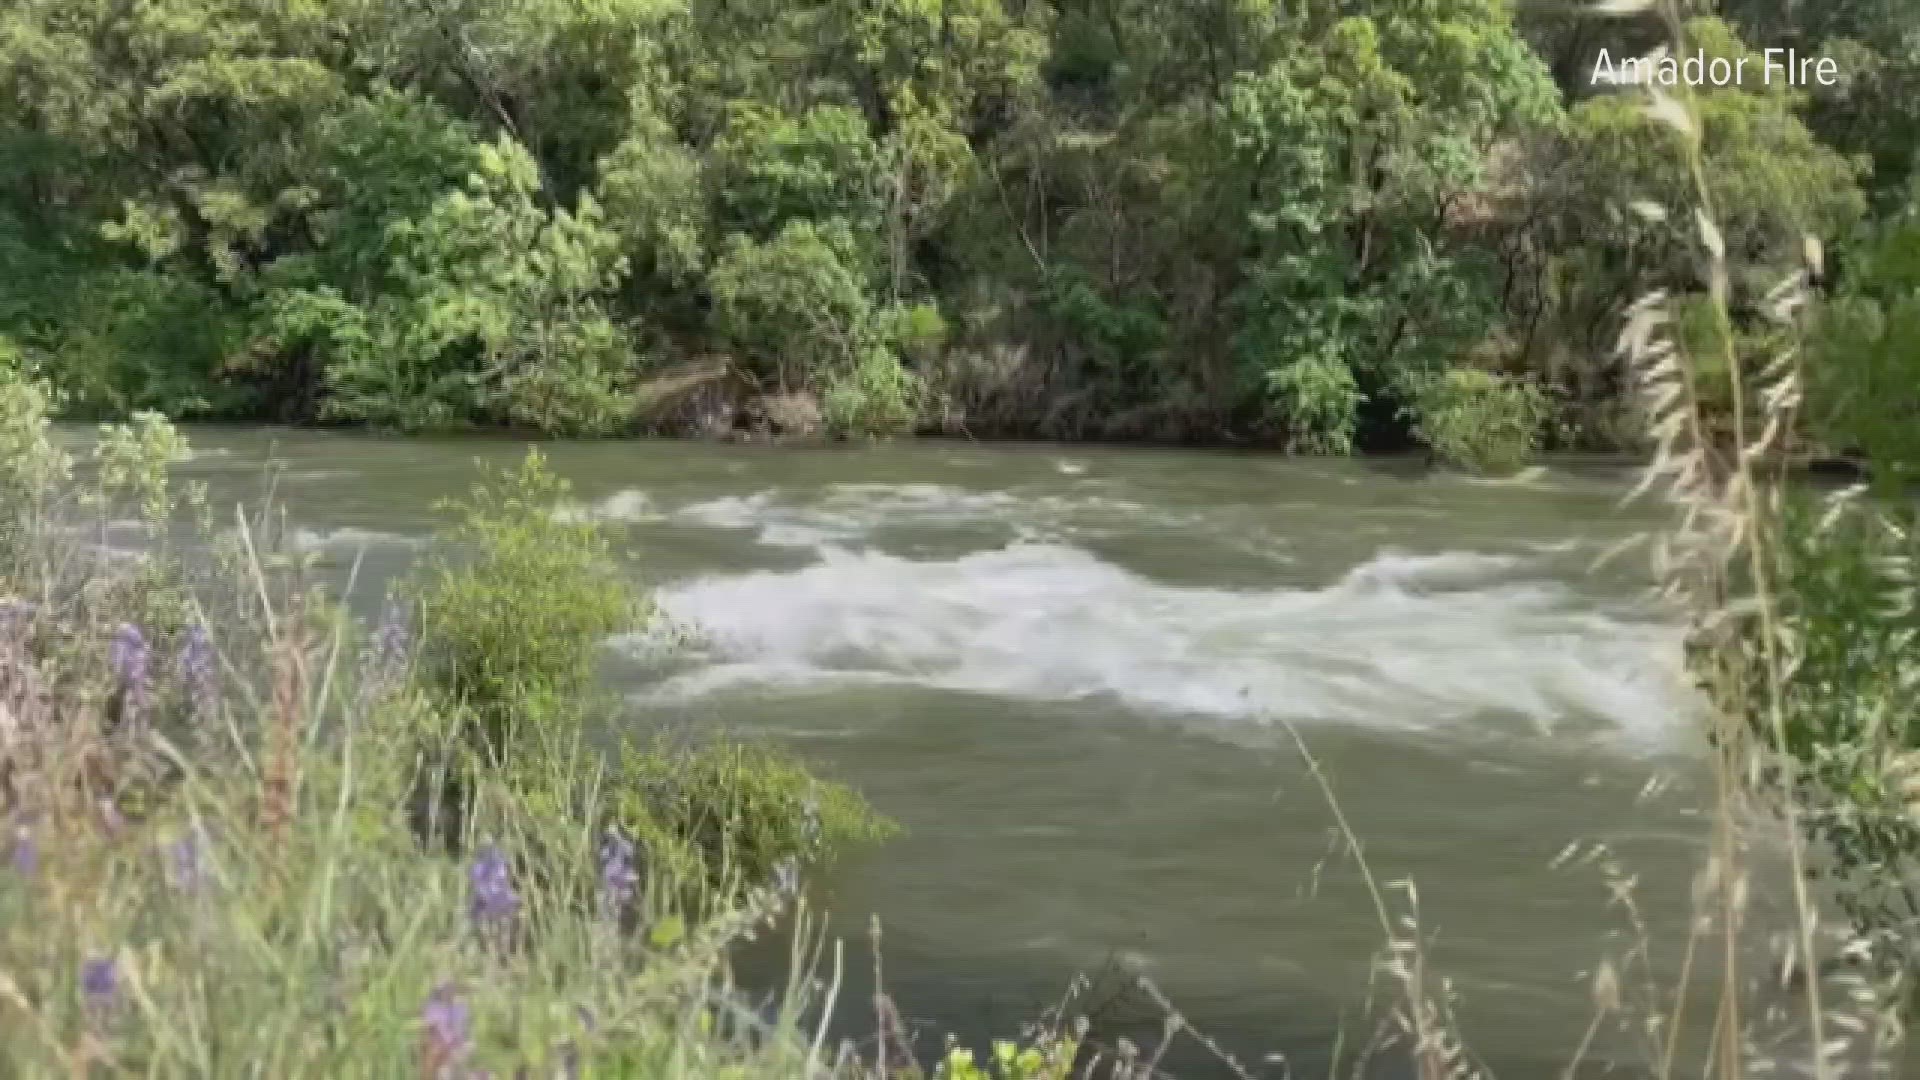 First responders in Amador County rescued a woman who was stranded in the middle of the Mokelumne River Thursday afternoon, officials say.